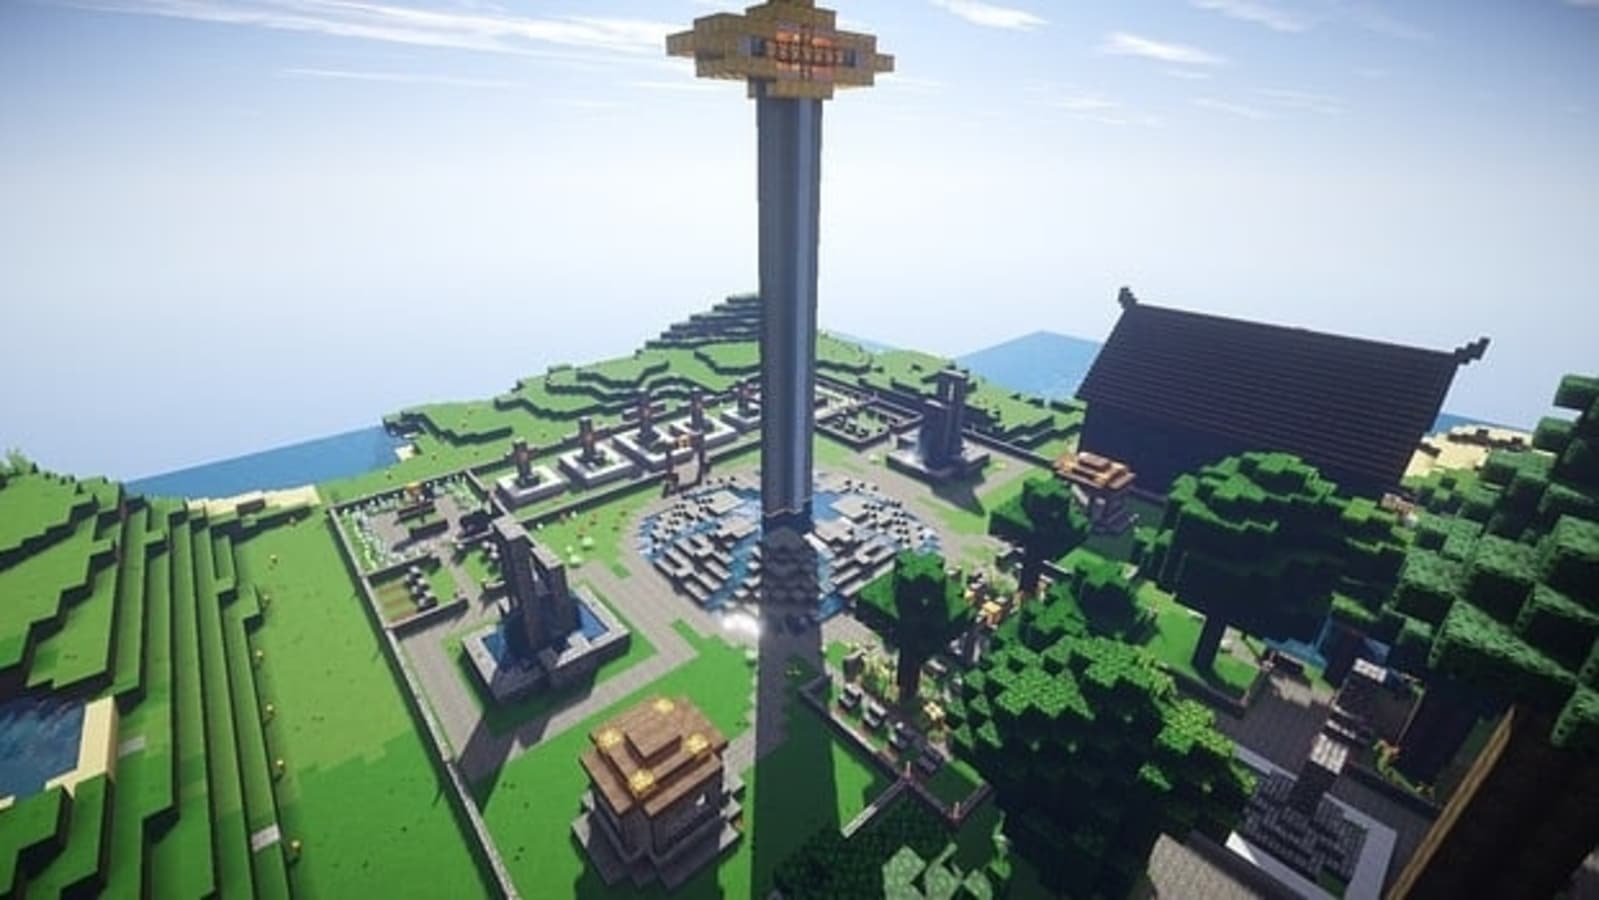 Minecraft has officially sold 200 million copies